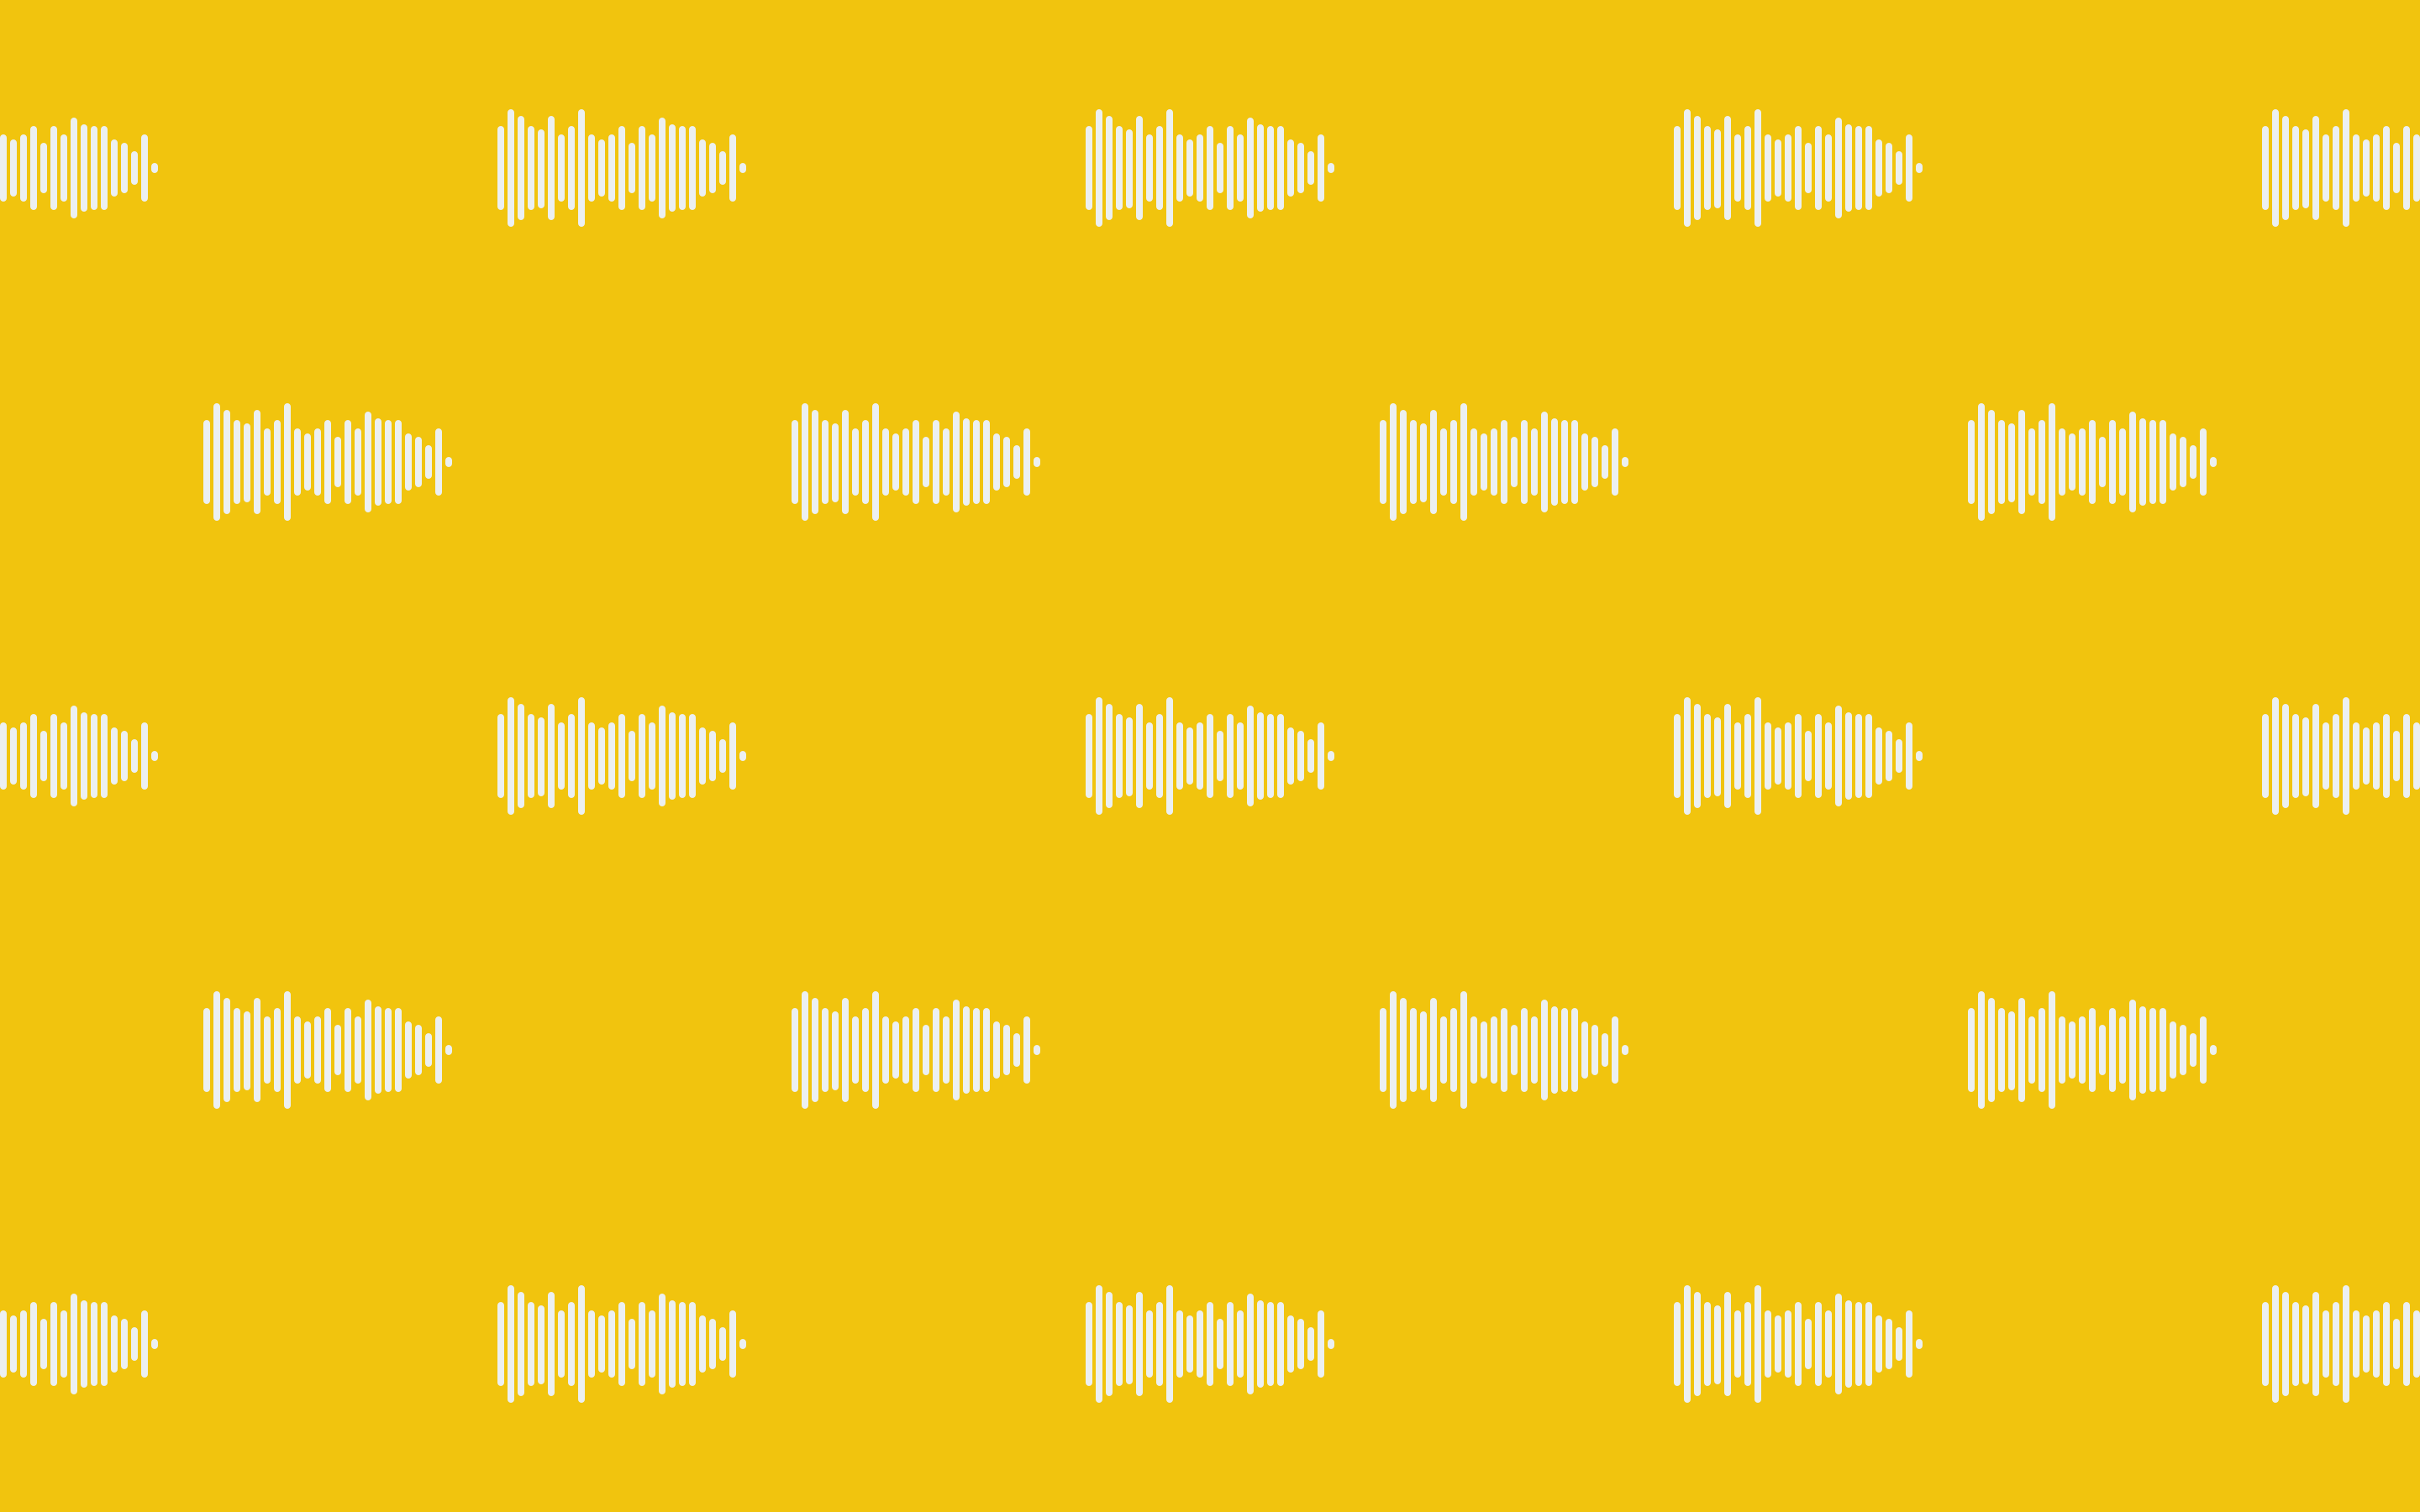 A yellow background with a pattern of white audio waves. - Yellow